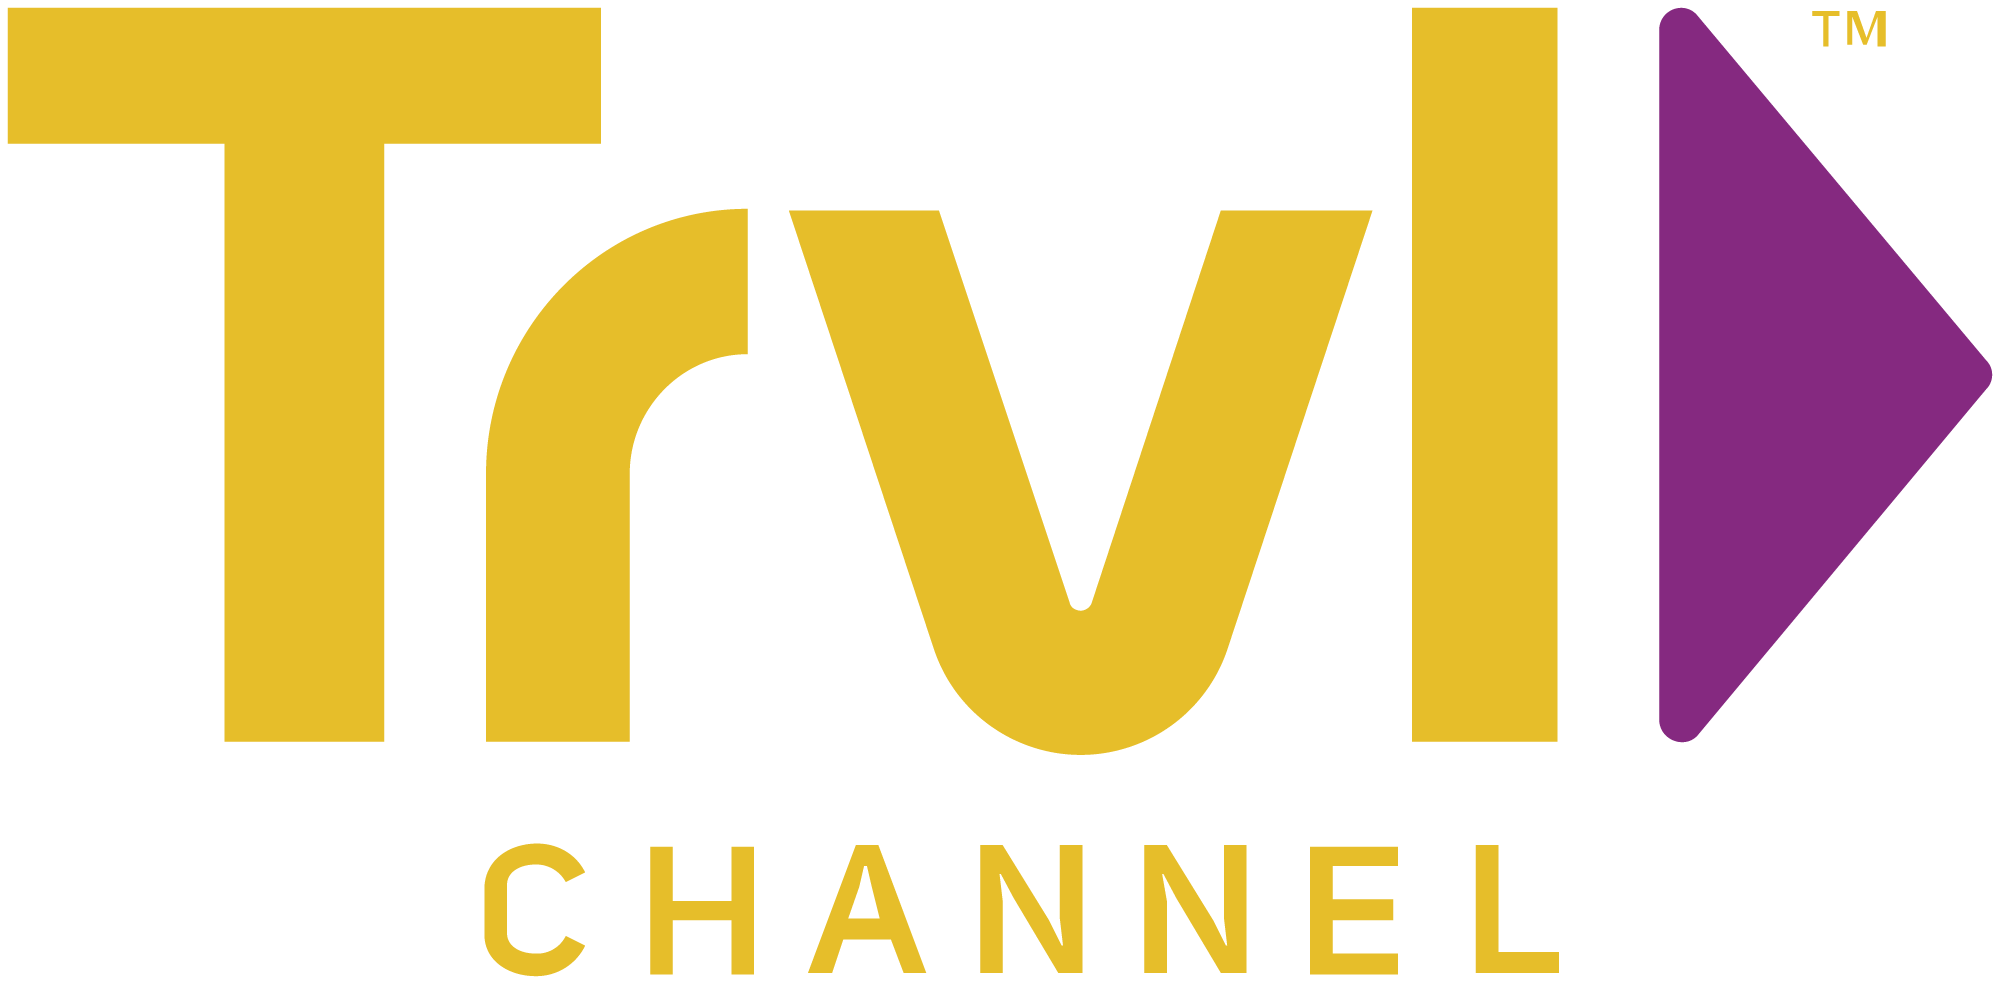 News Channel Logo - Brand New: New Logo for Travel Channel